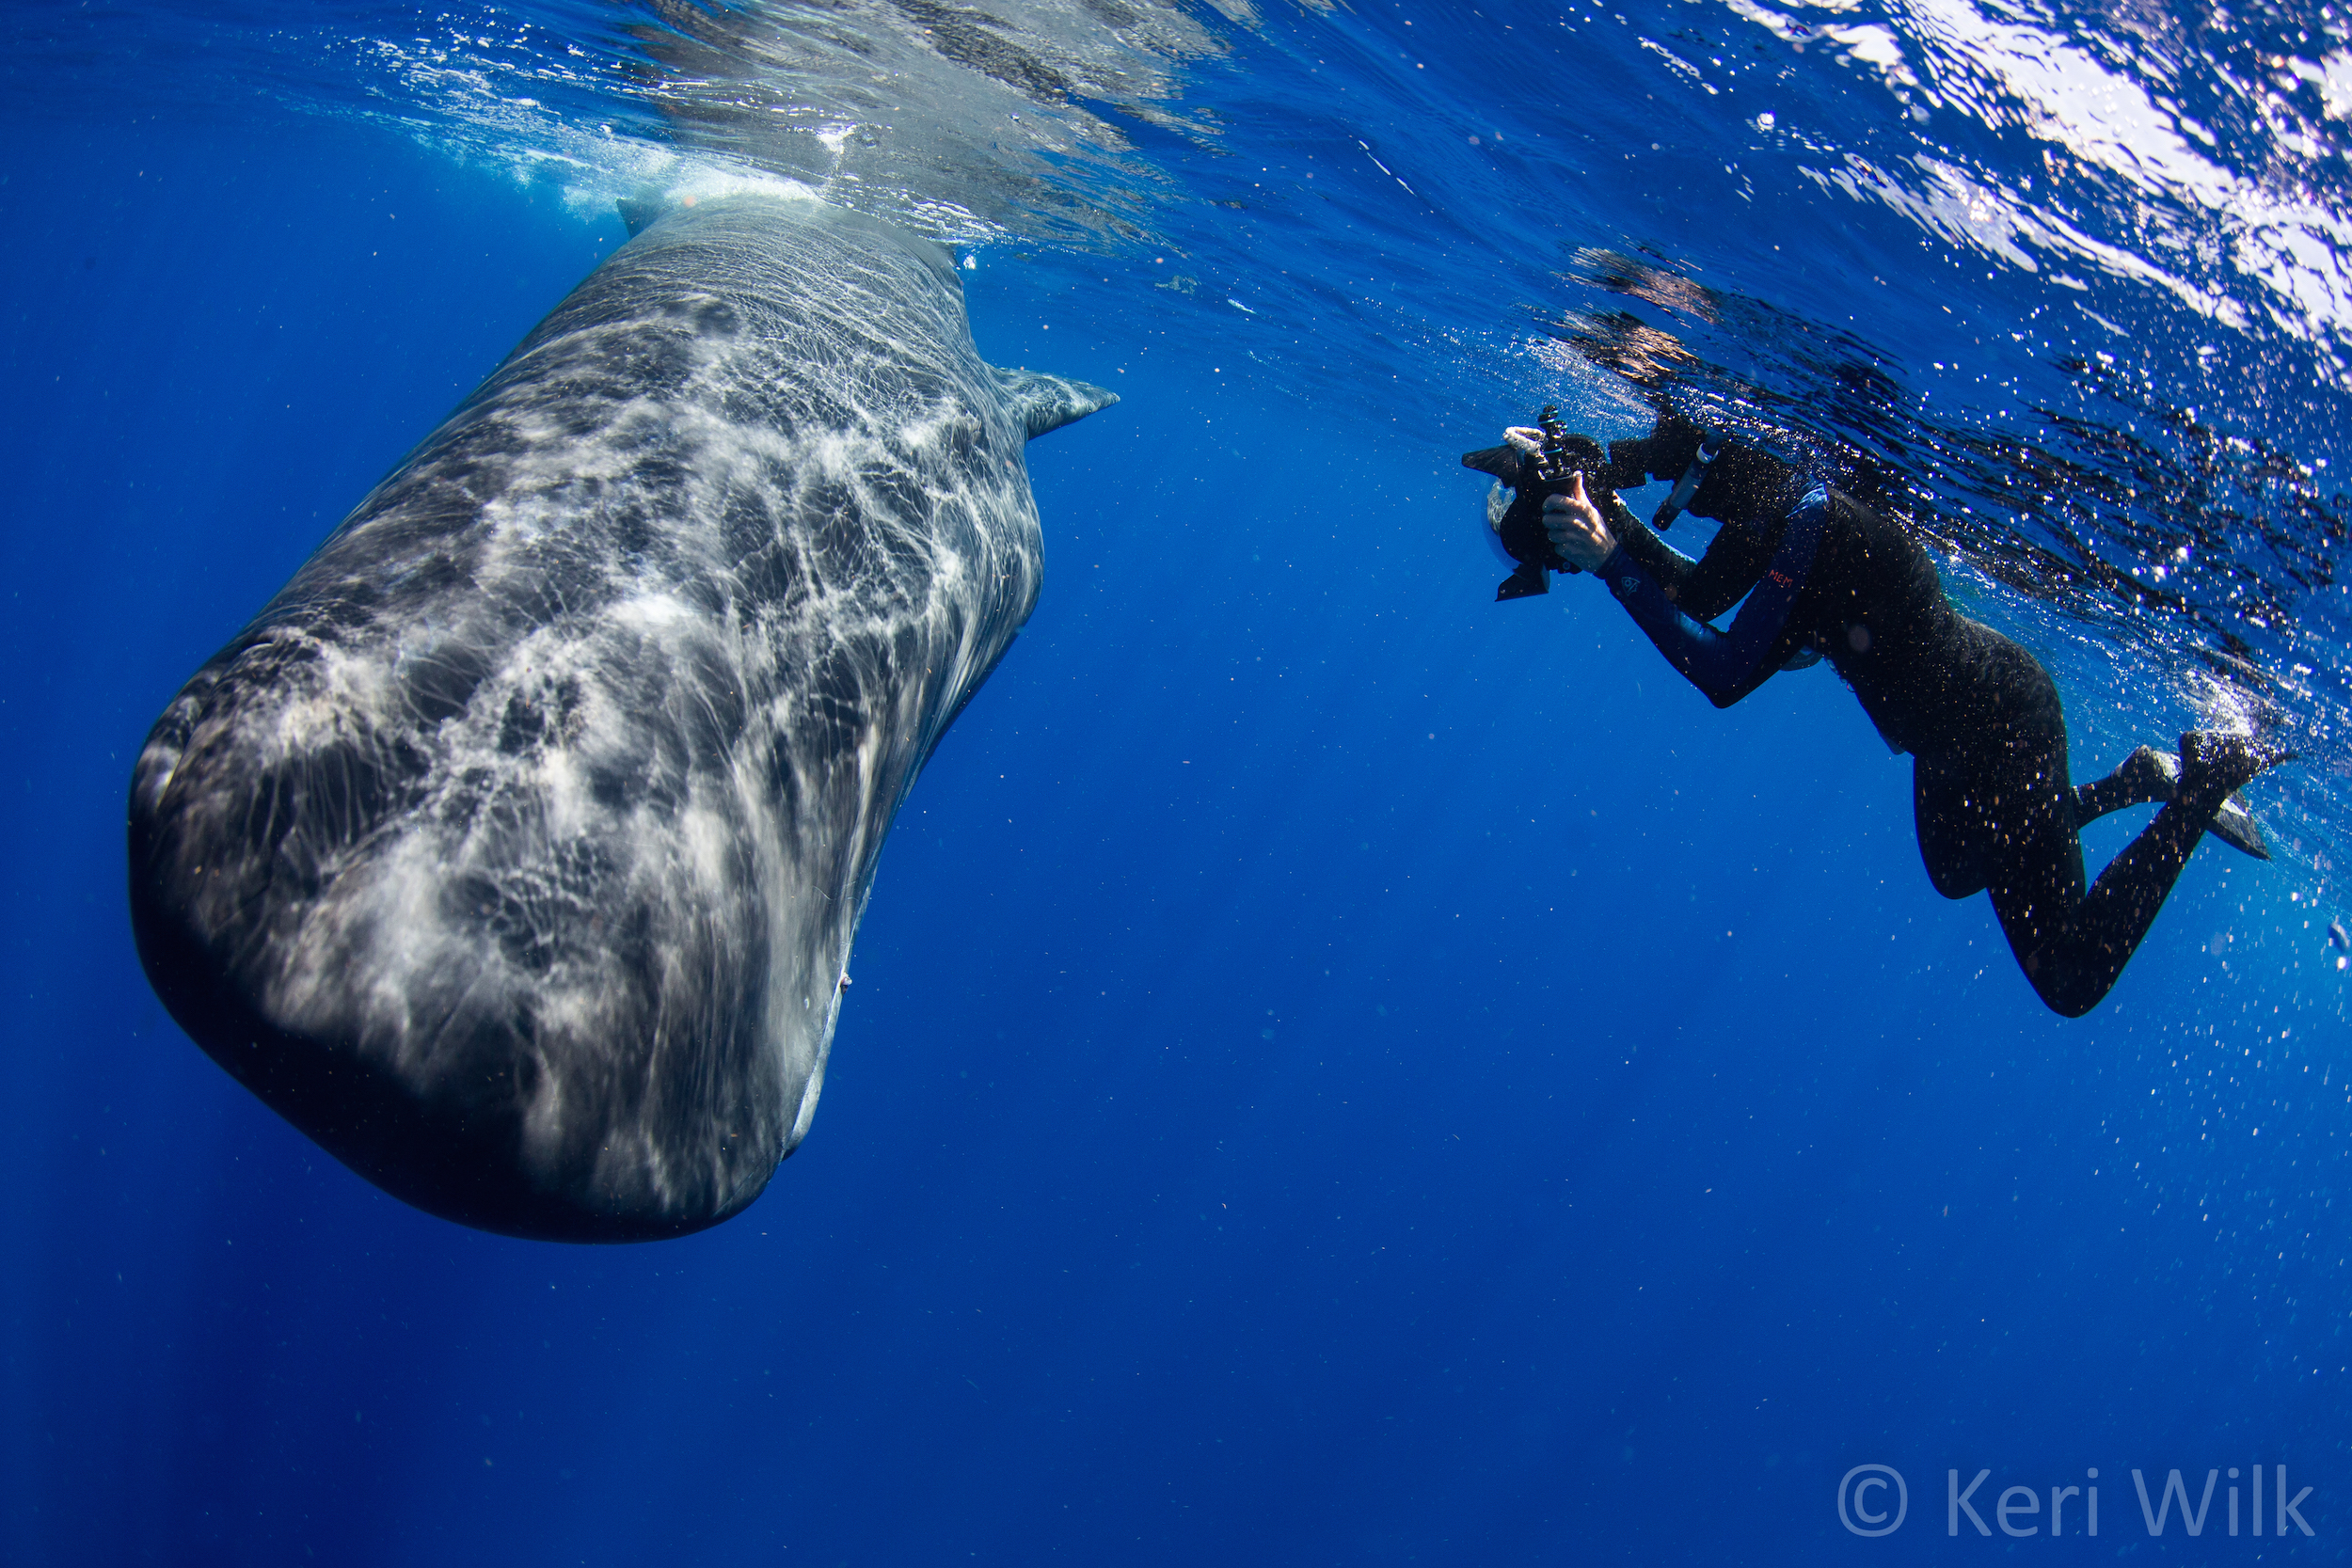 Underwater Photographer Gets Caught in a Sperm Whale 'Poopnado,' Brings Back Photos